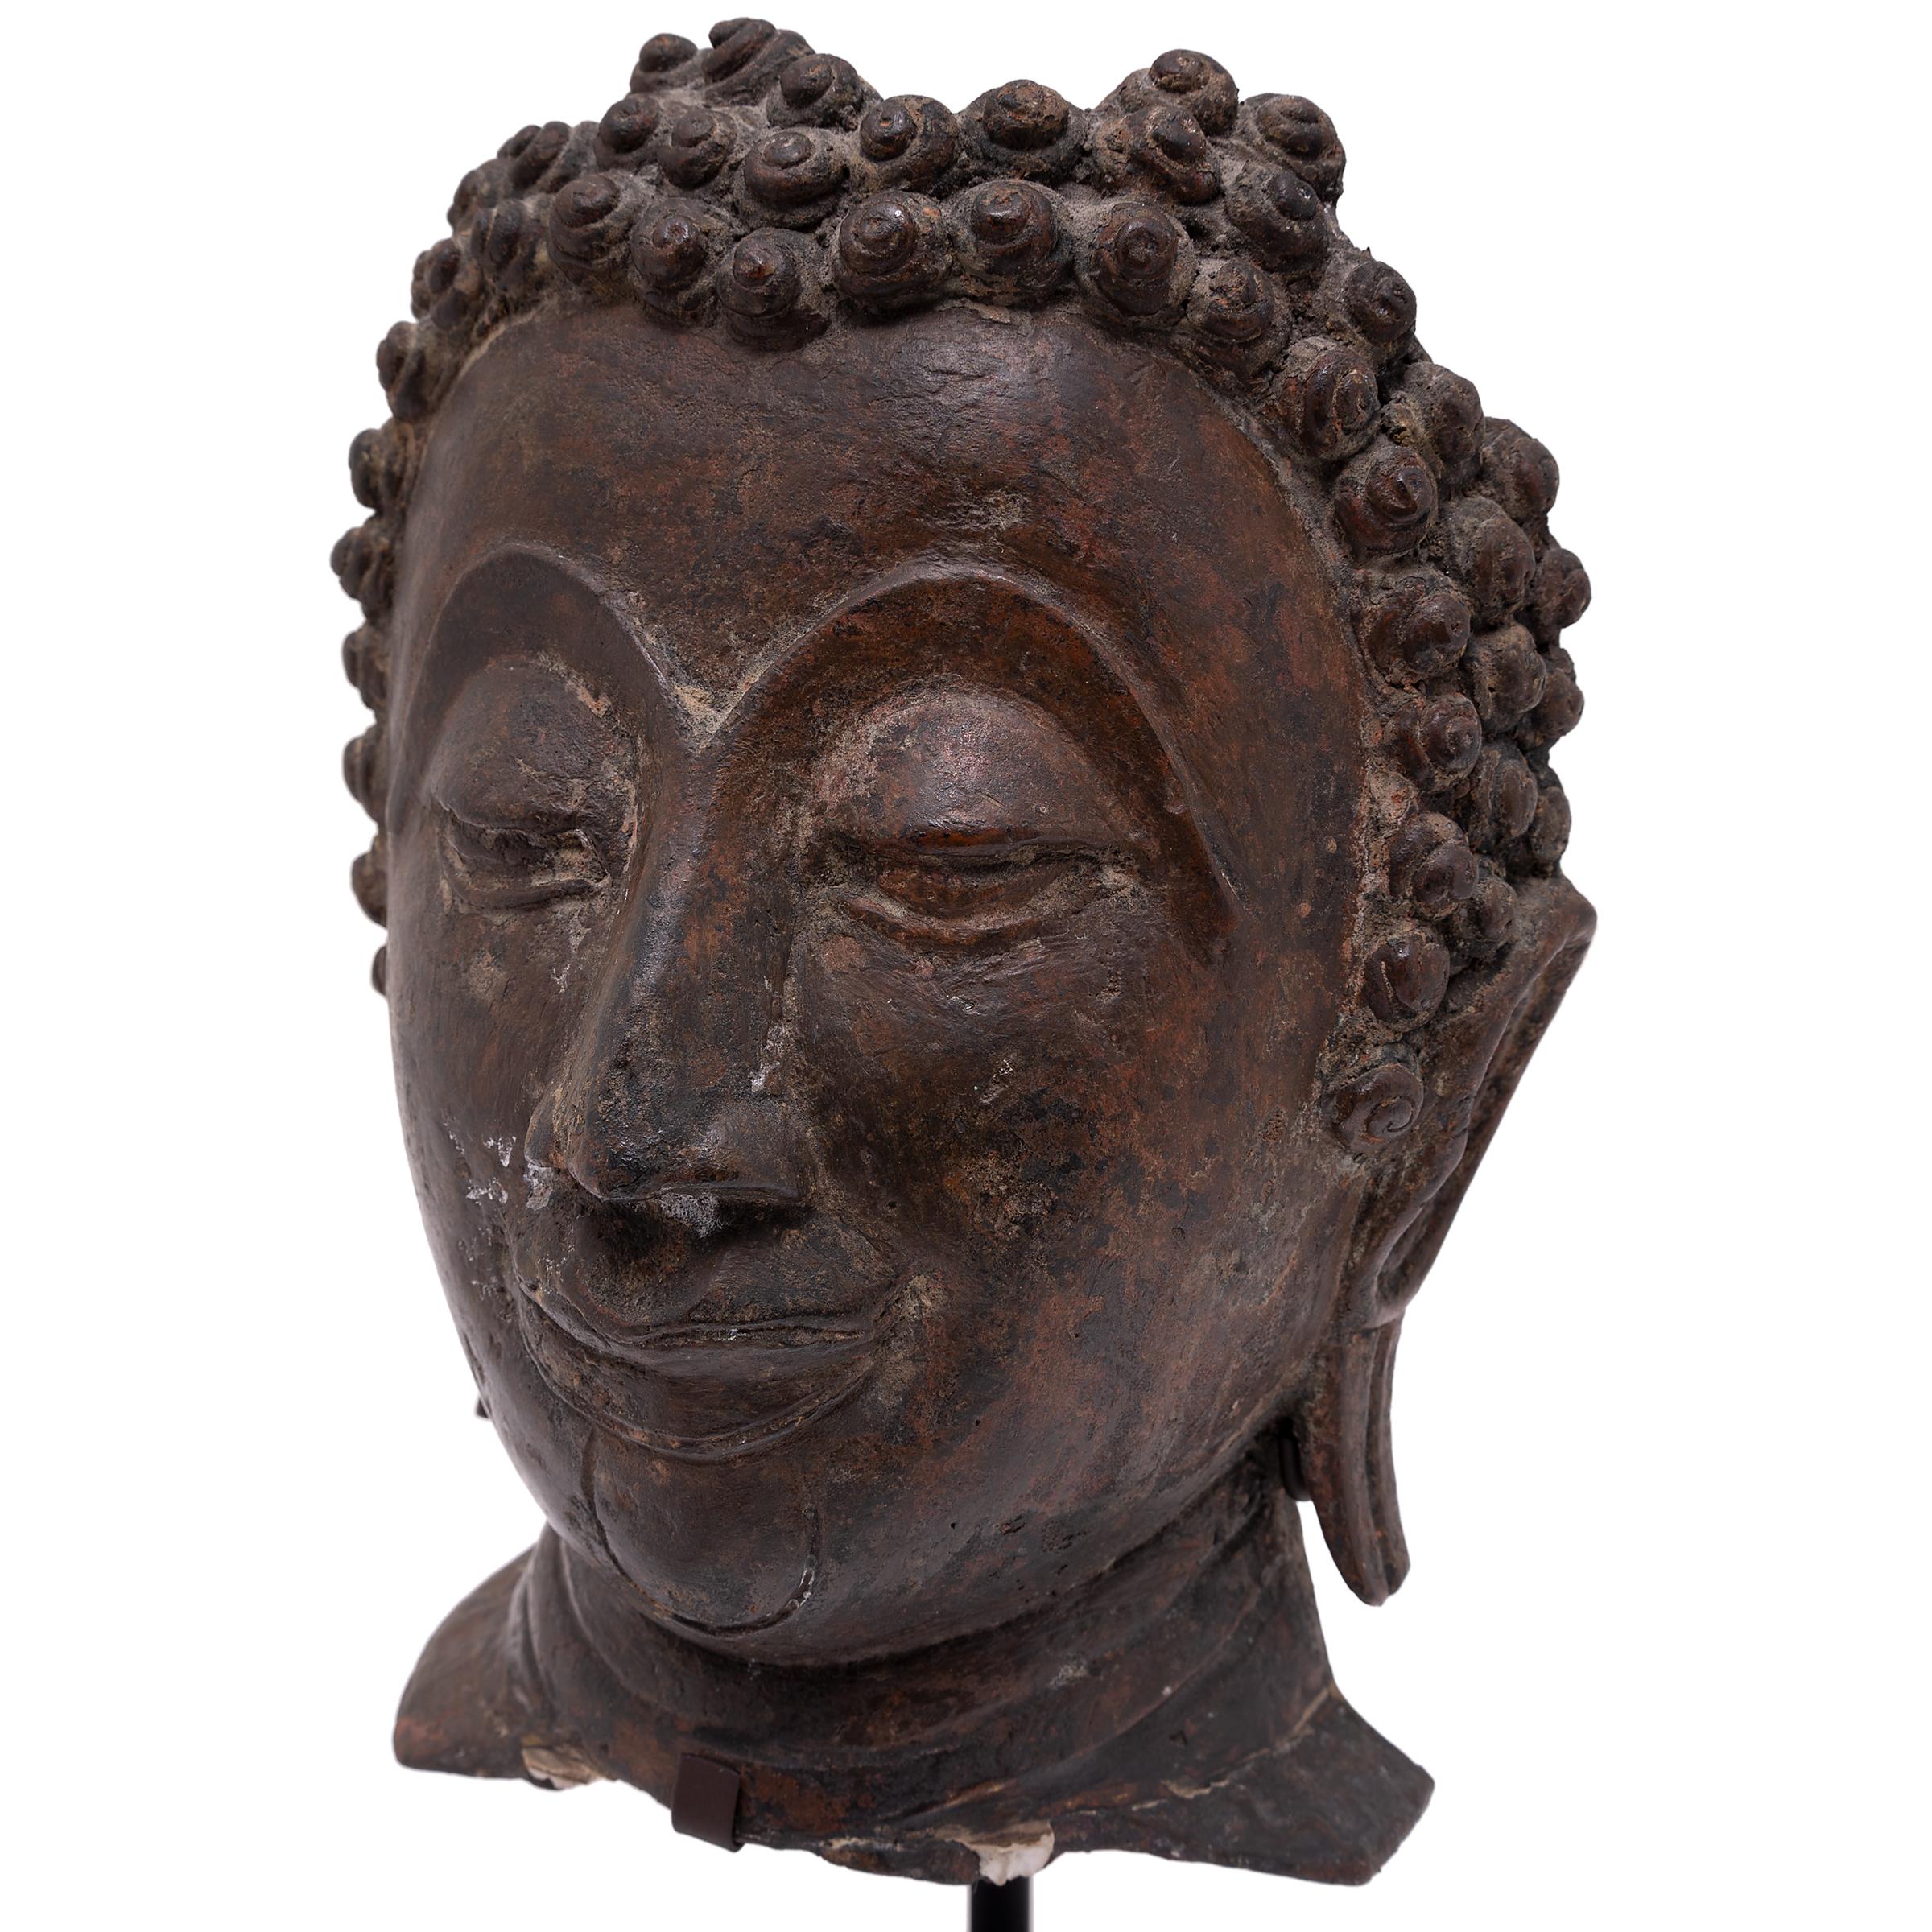 Dated to the early 19th-century, this cast bronze bust depicts the serene face of the historical Buddha, known also as Shaka, Shakyamuni, or Siddhartha Gautama. The most common subject in Buddhist iconography, the Buddha Shakyamuni is revered as a